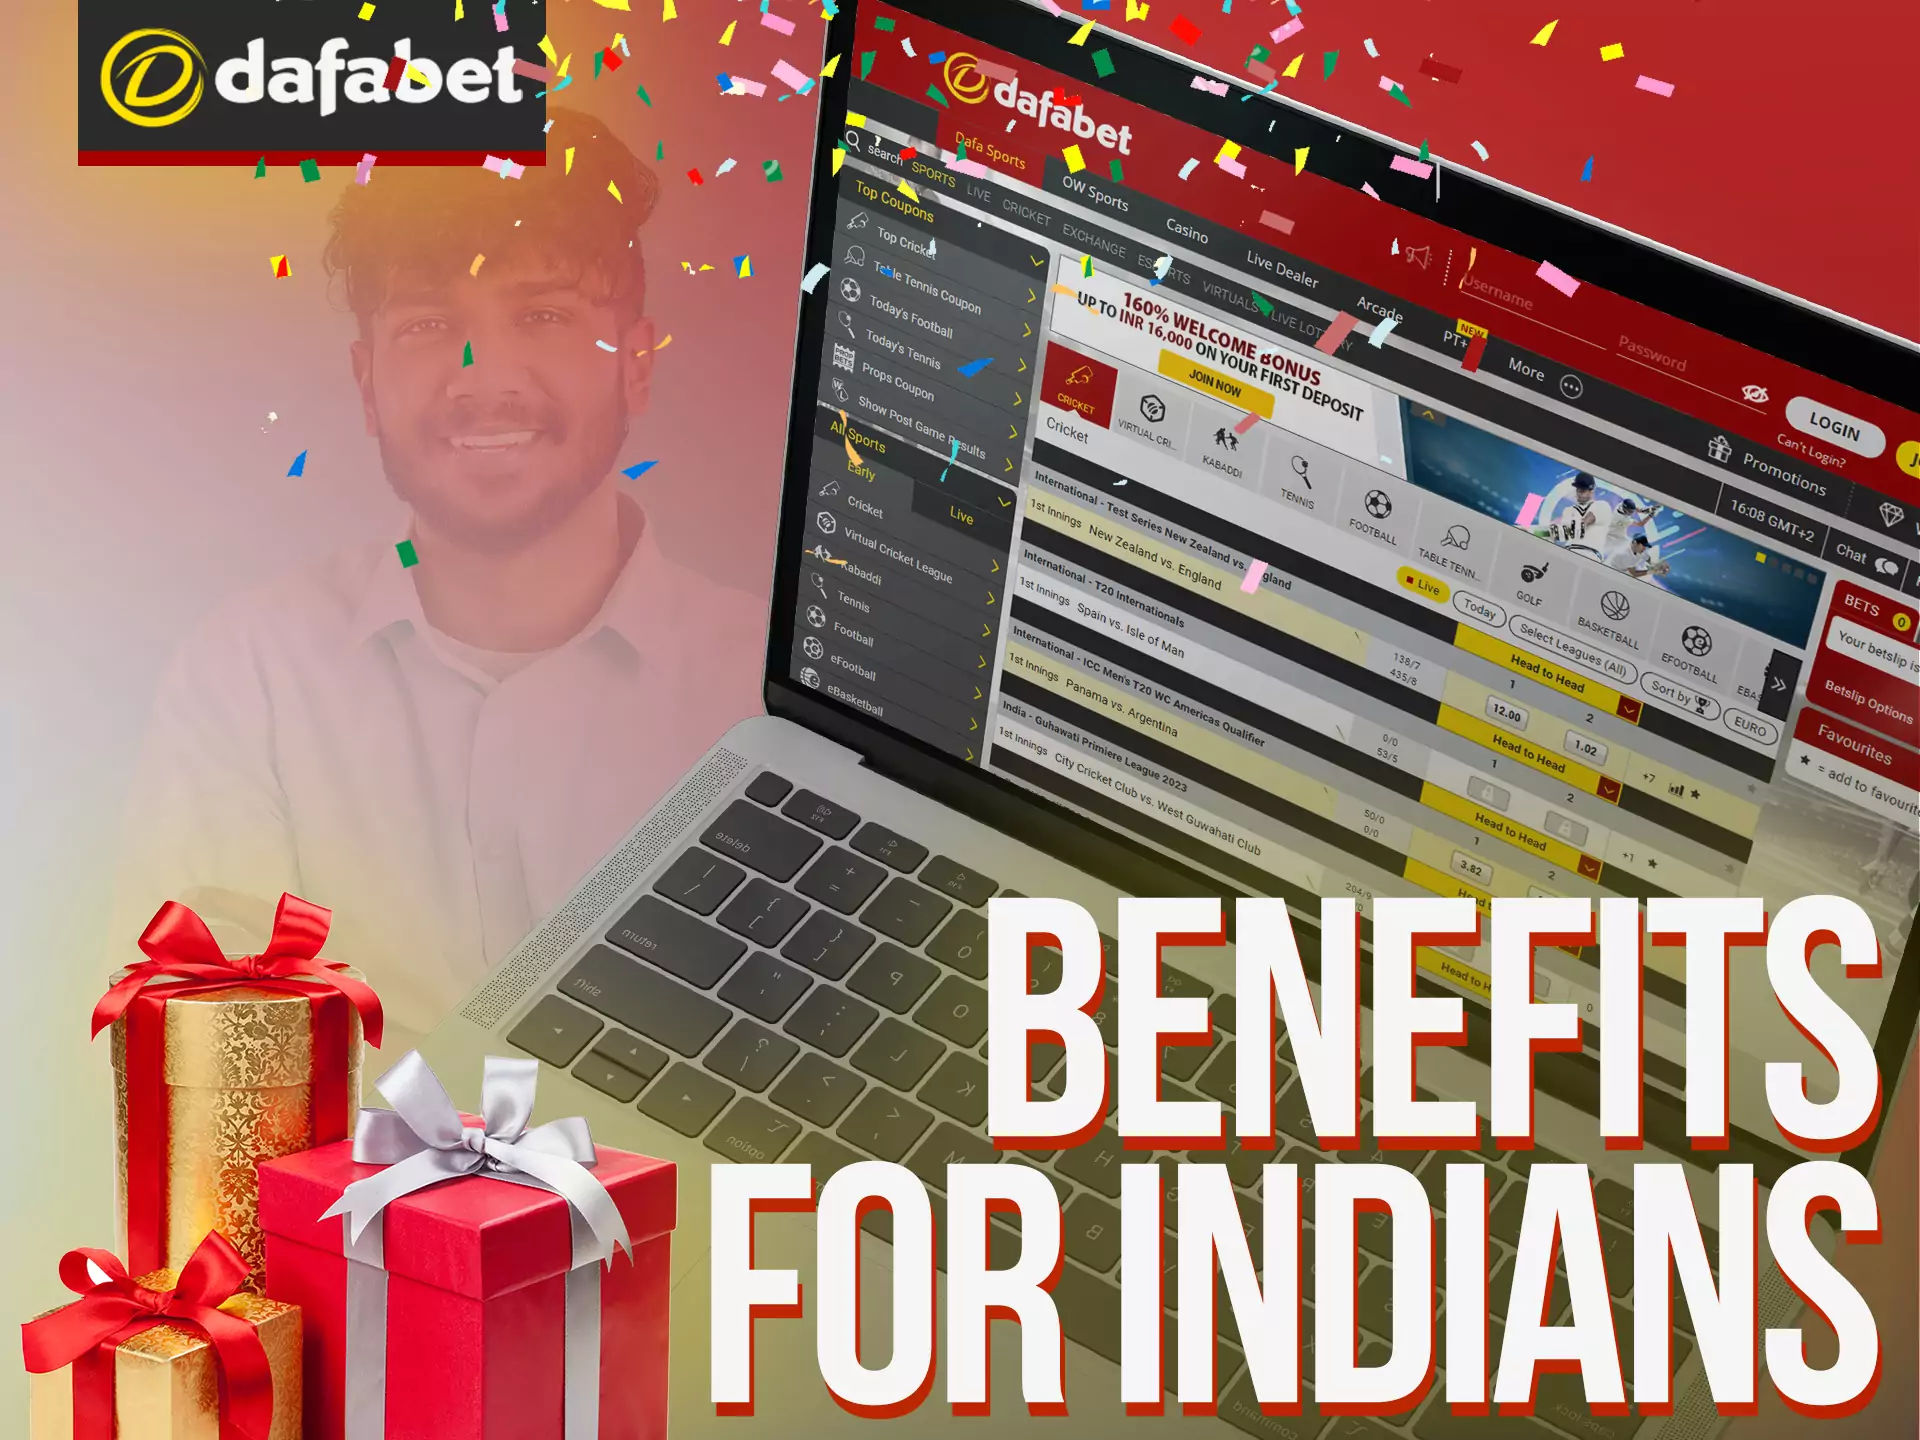 Dafabet offers many benefits and bonuses to players from India.